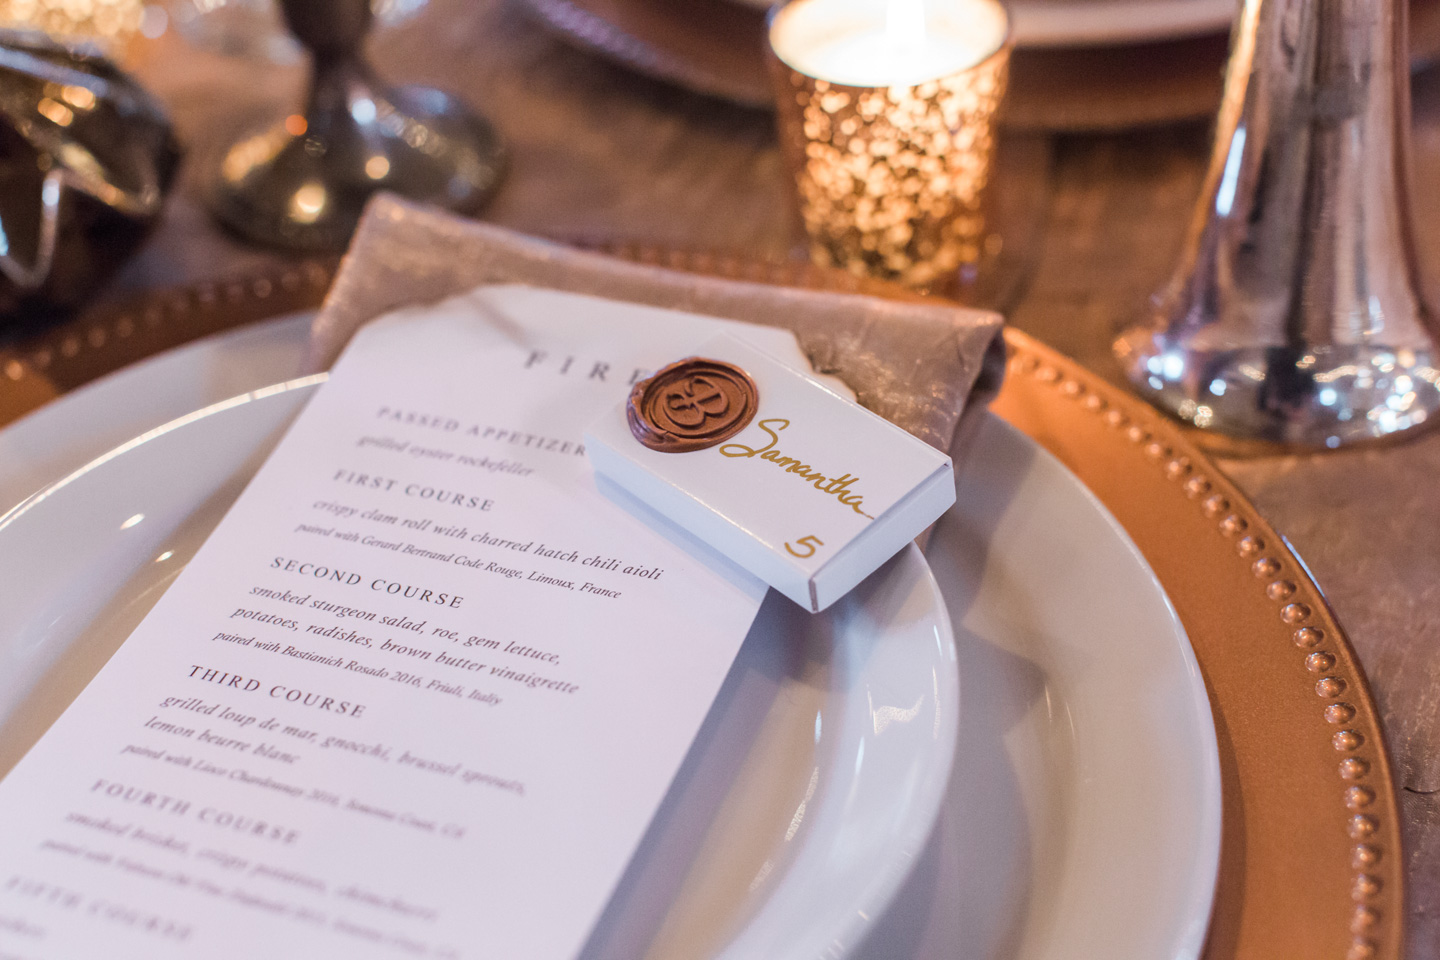 Fall farm to table dinner at Blue bell farms captured by Love Tree Studios.